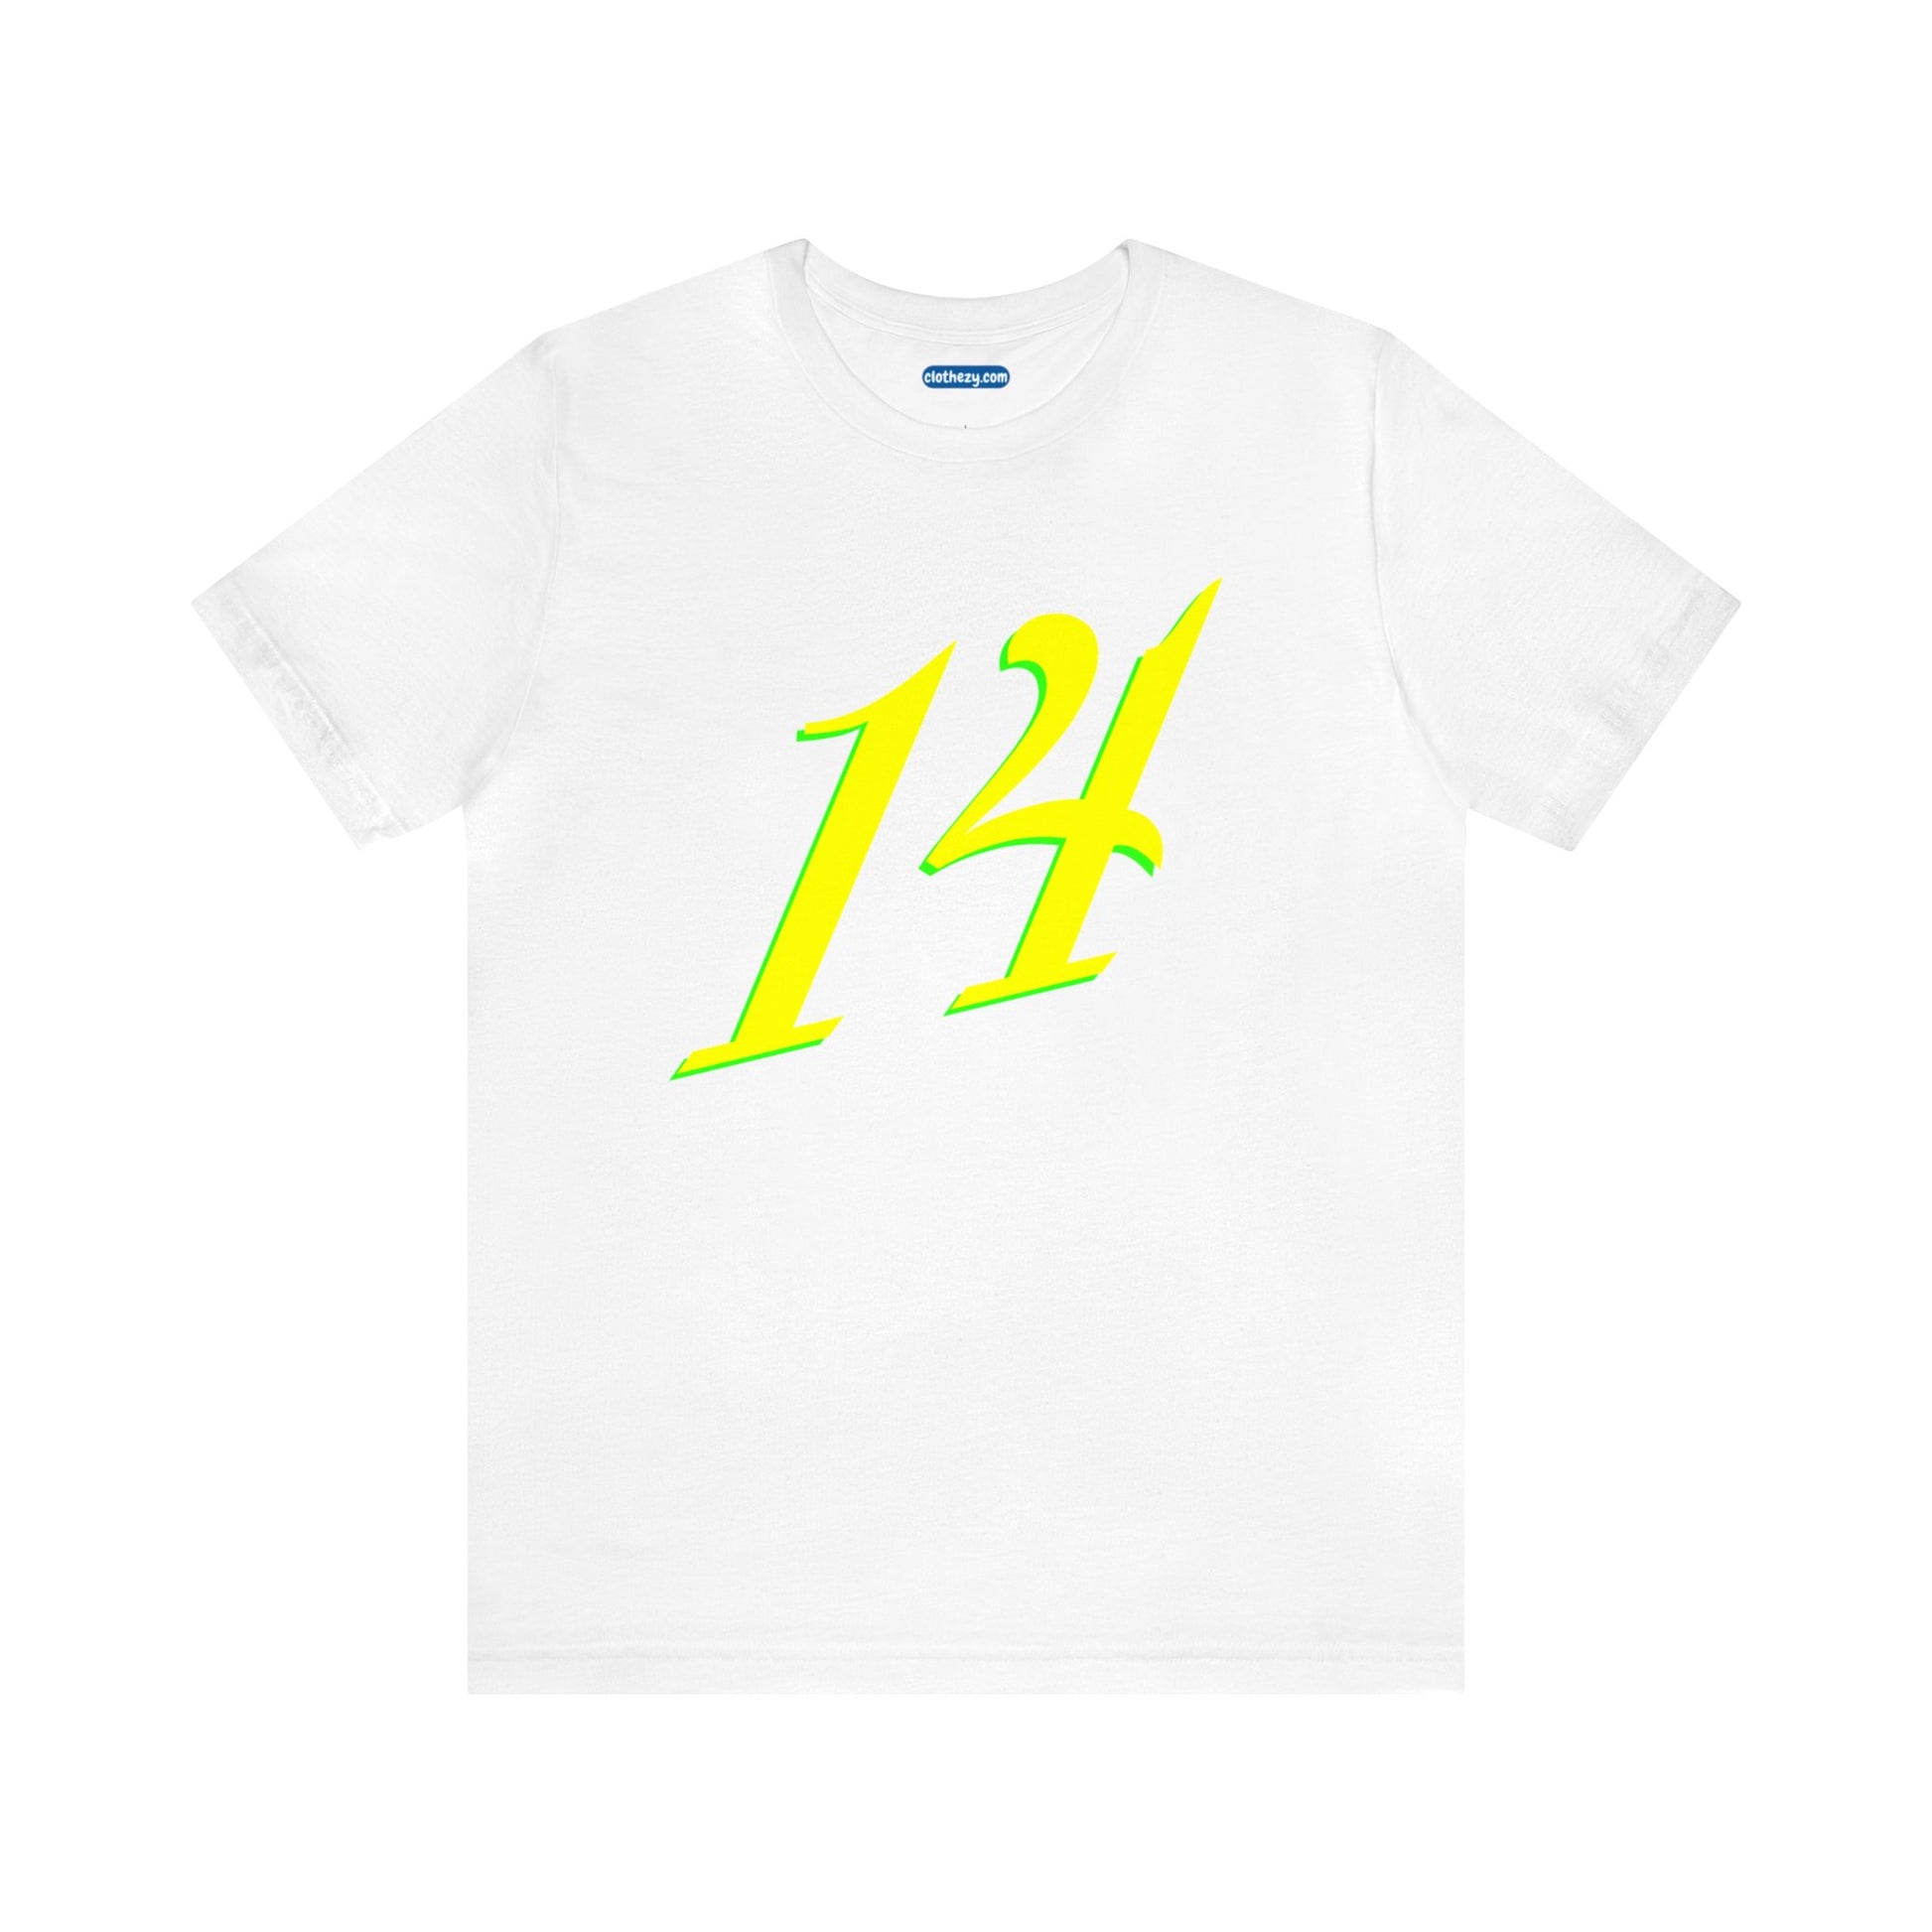 Number 14 Design - Soft Cotton Tee for birthdays and celebrations, Gift for friends and family, Multiple Options by clothezy.com in White Size Small - Buy Now